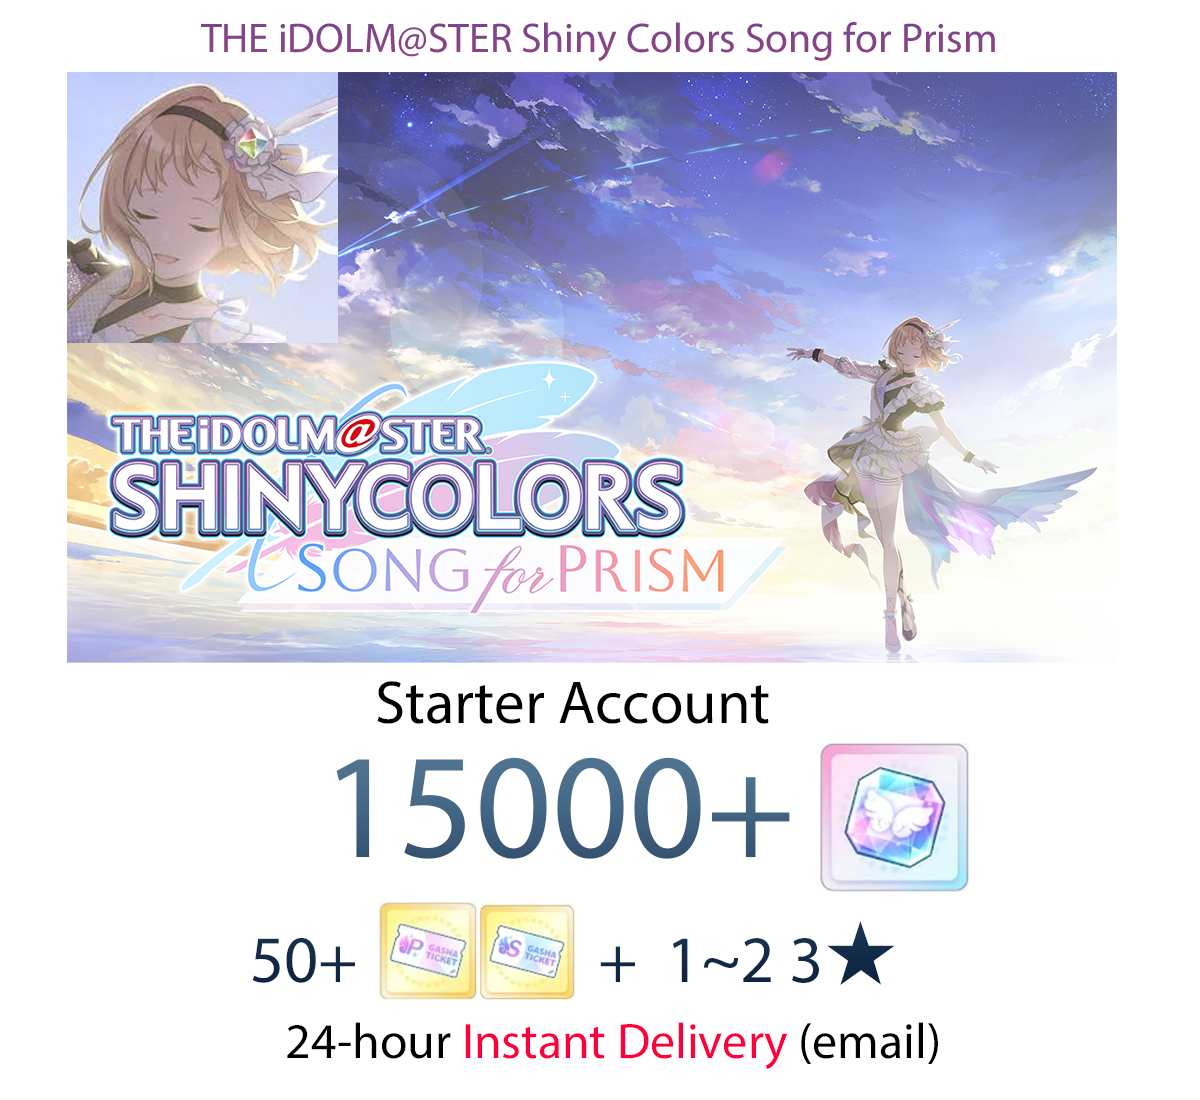 [JP] [INSTANT] 15000 Gems iDOLM@STER Shiny Colors Song for Prism Idolmaster Shanison Shinymas Starter Account